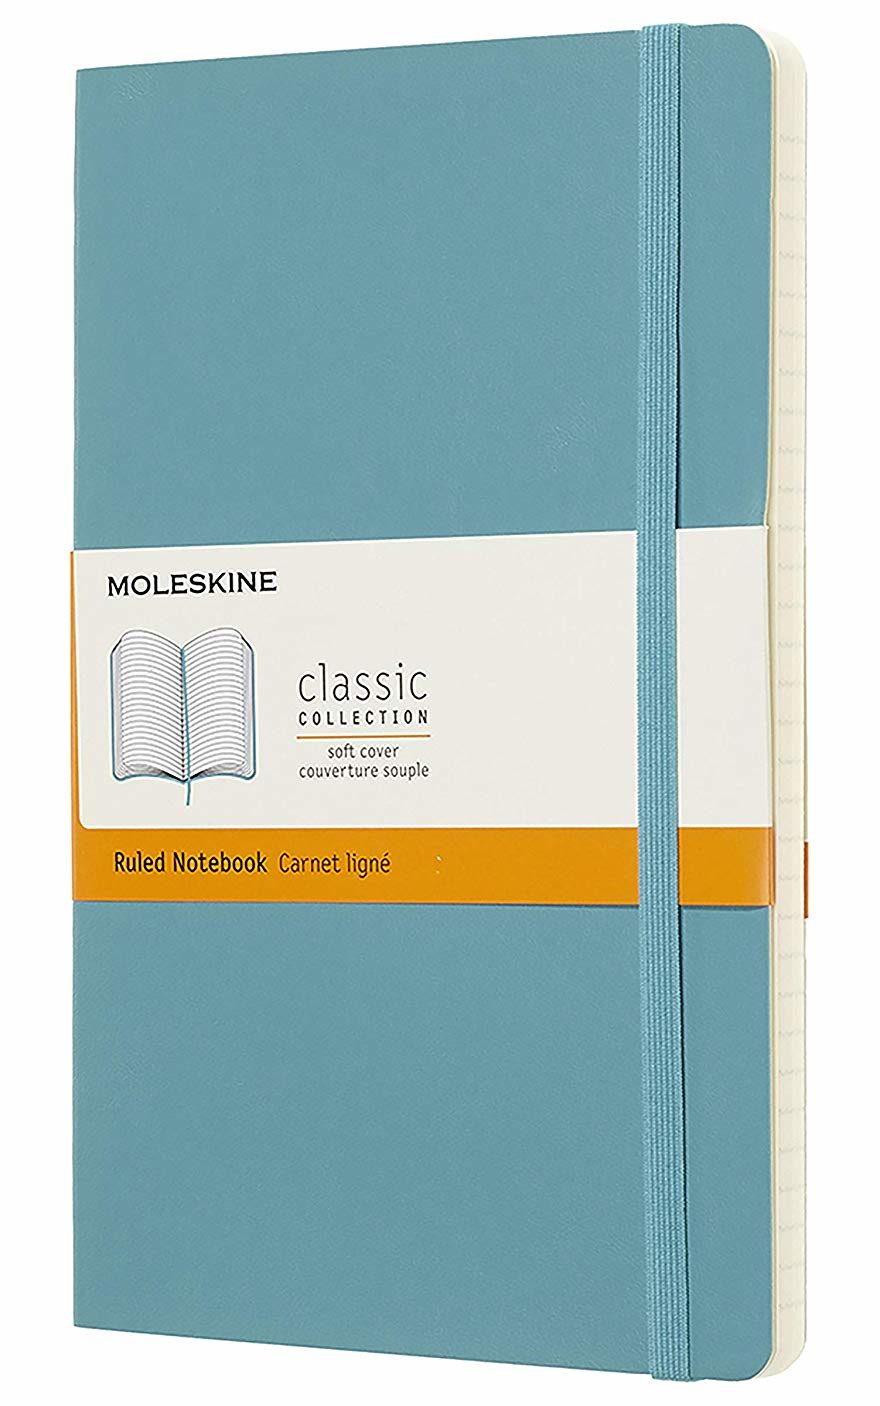 Gifts For Coworker 2023: Moleskin Notebook 2023